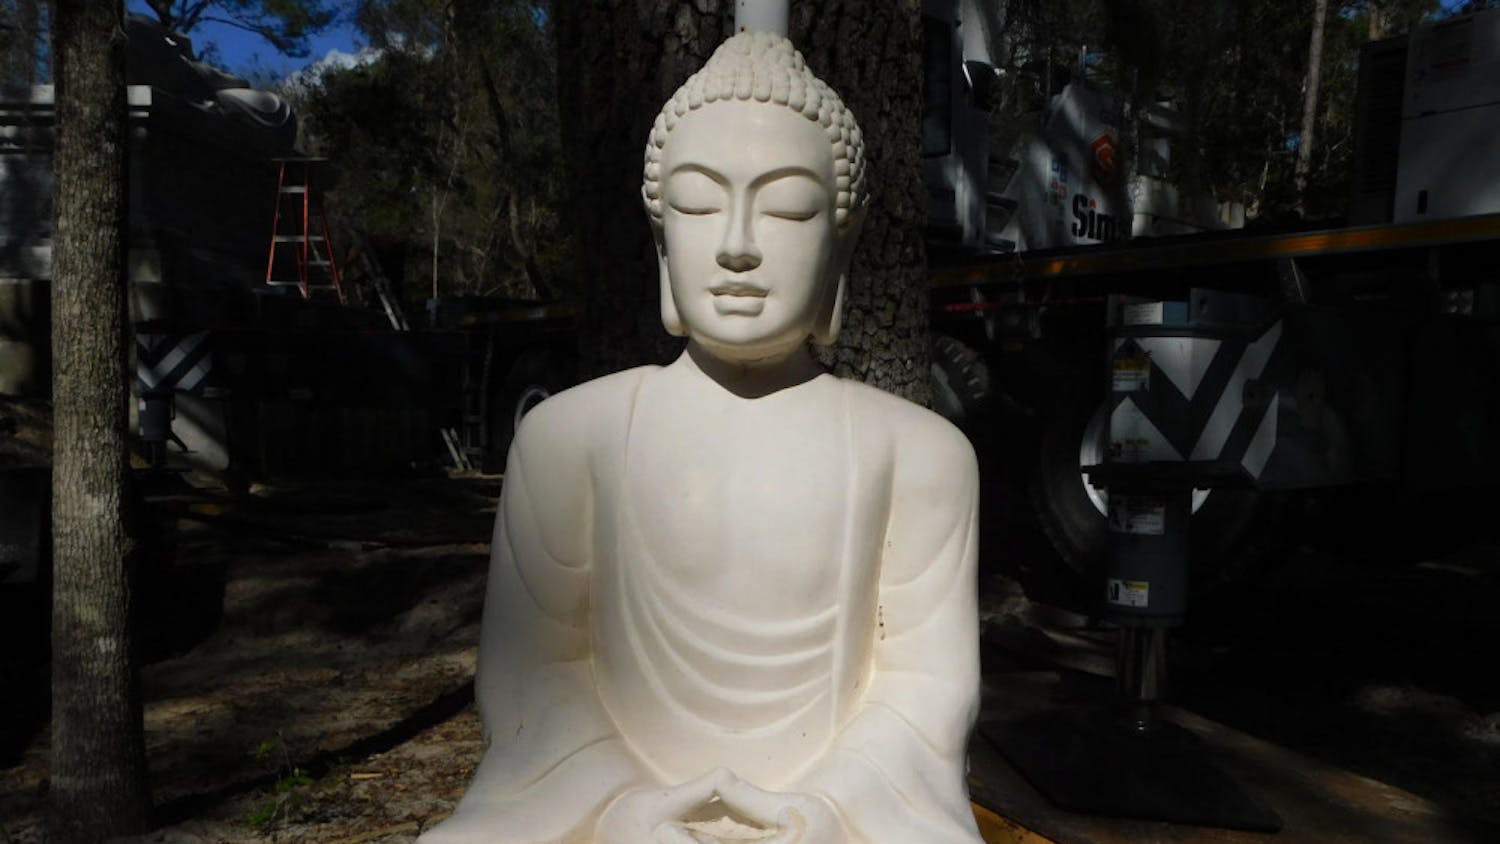 The smaller sitting Buddha weighs 66,138.7 pounds. 